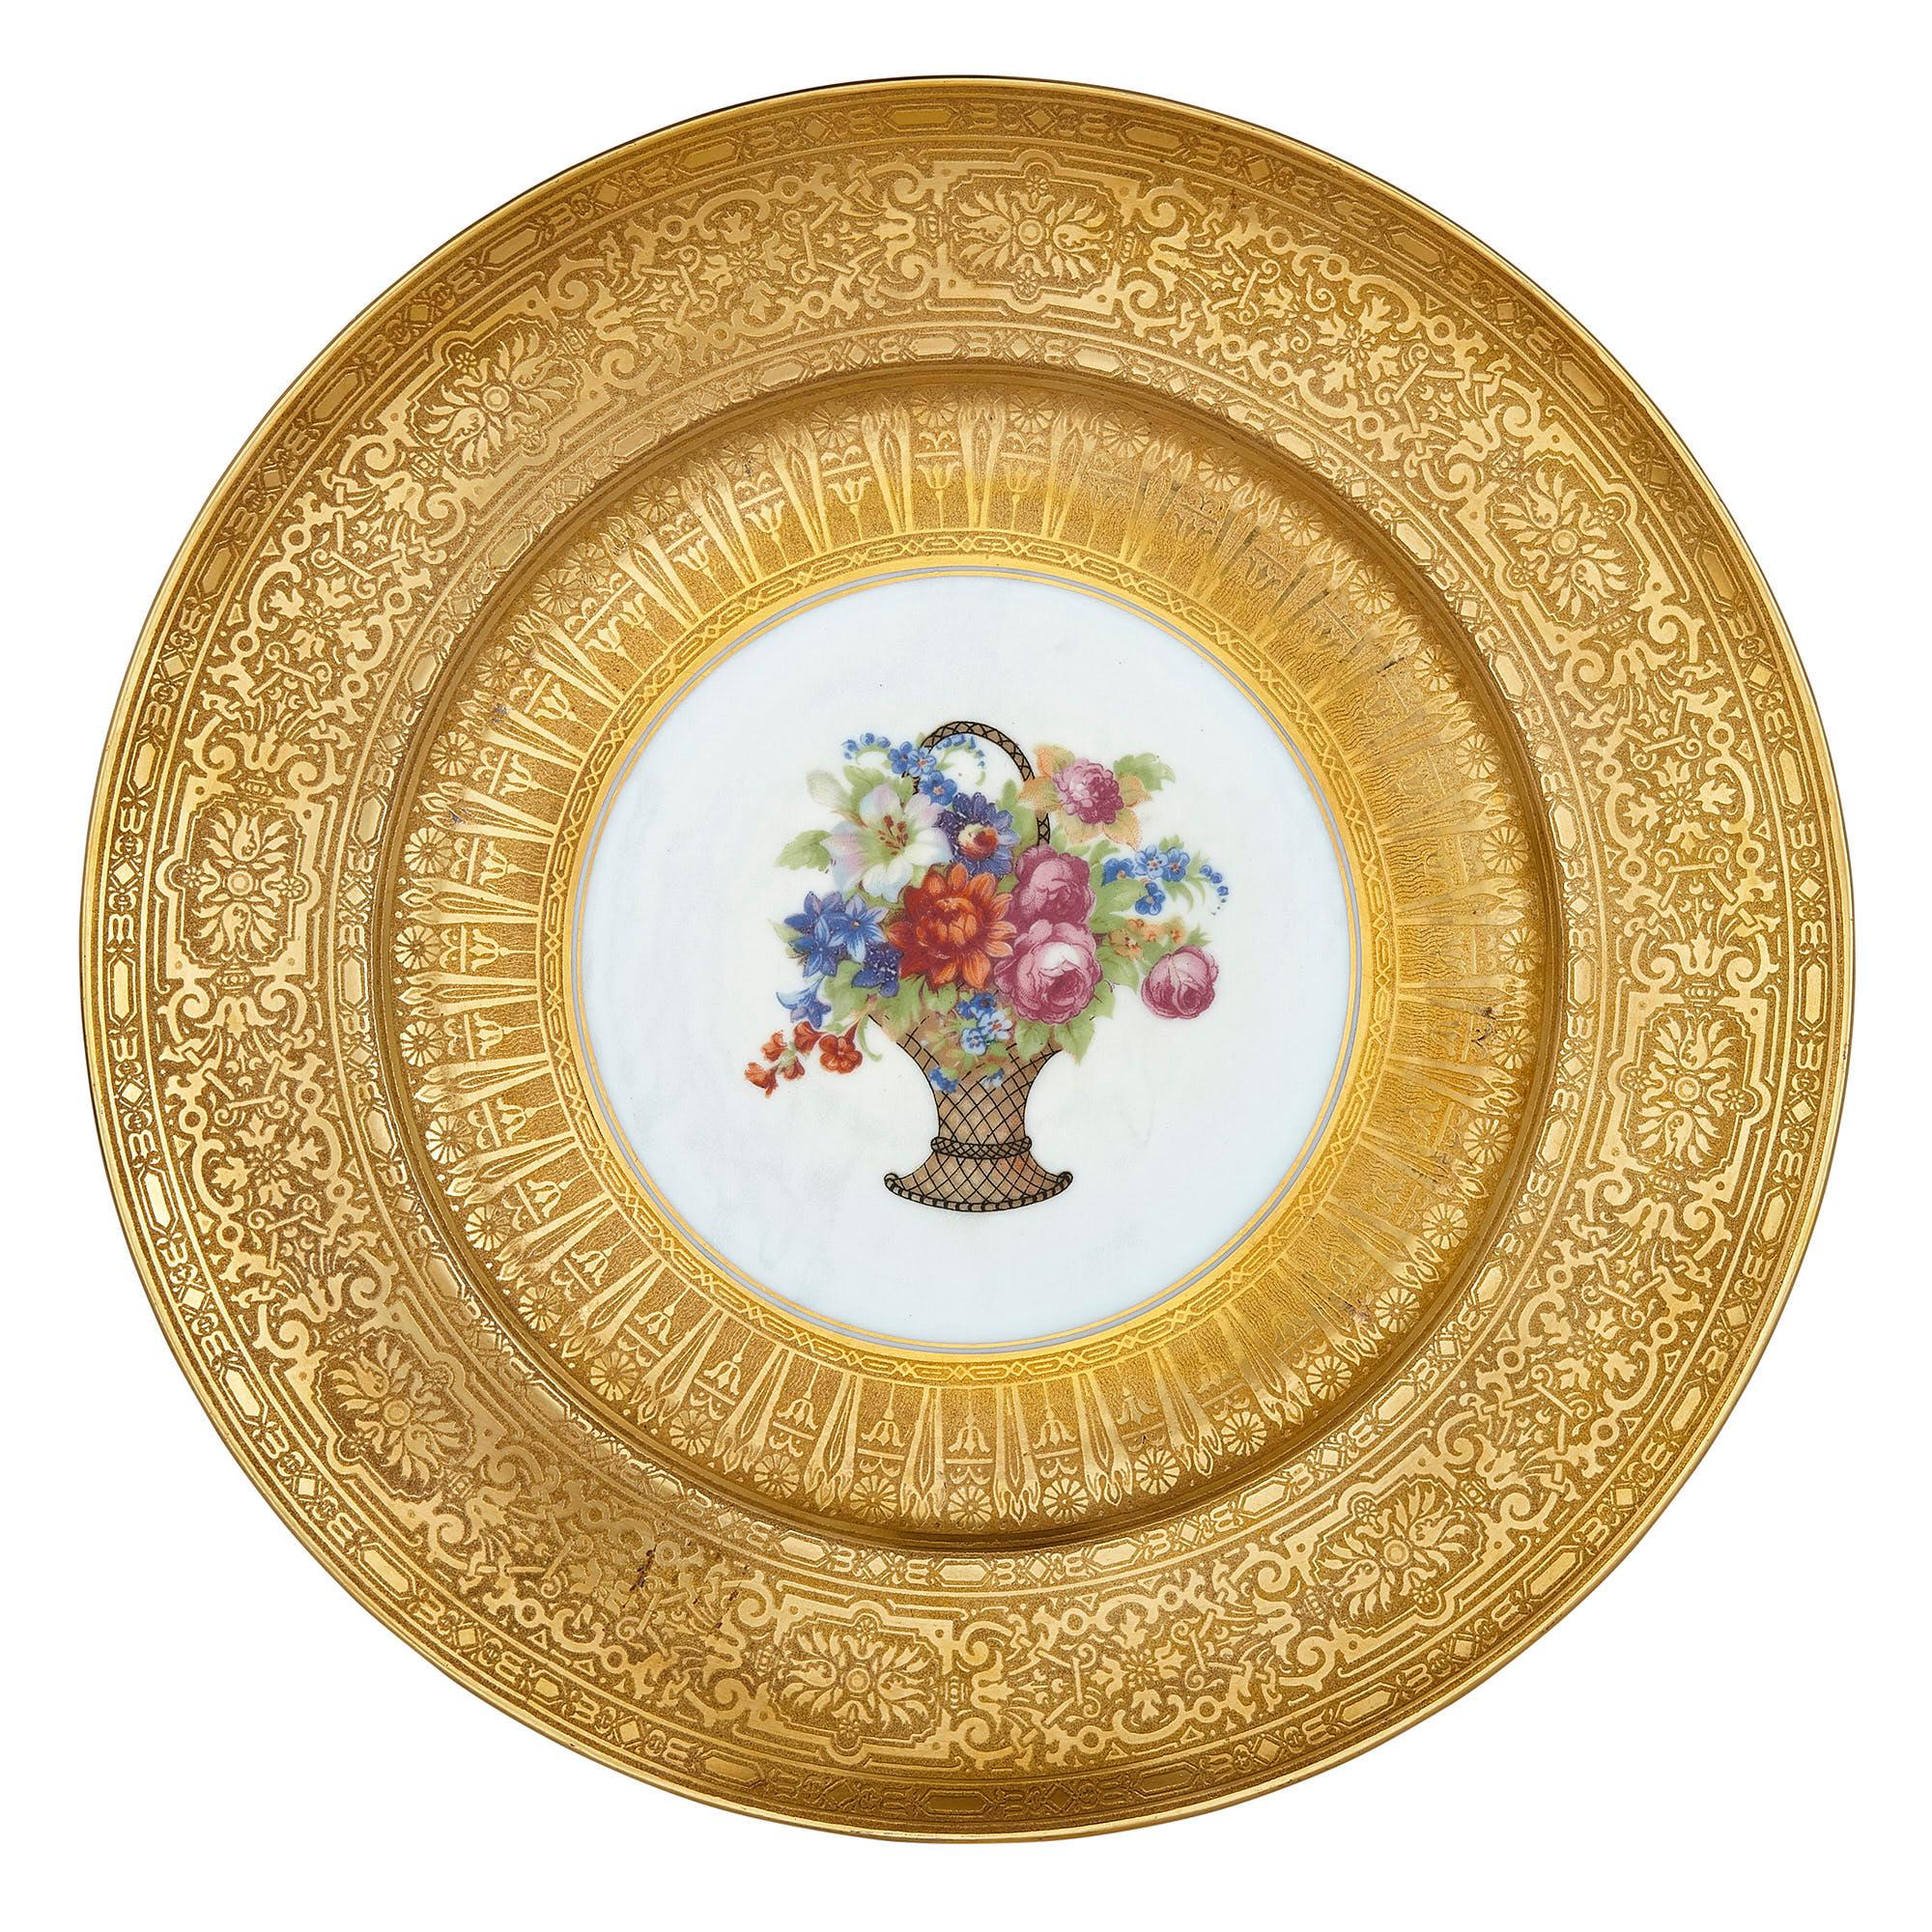 Twelve parcel gilt Bohemian porcelain dinner plates by P.A.L.T
Czech, early 20th century
Measures: Height 2.5cm, diameter 27cm

This rare set of early 20th century porcelain dinner plates is perhaps the finest work of the little-known